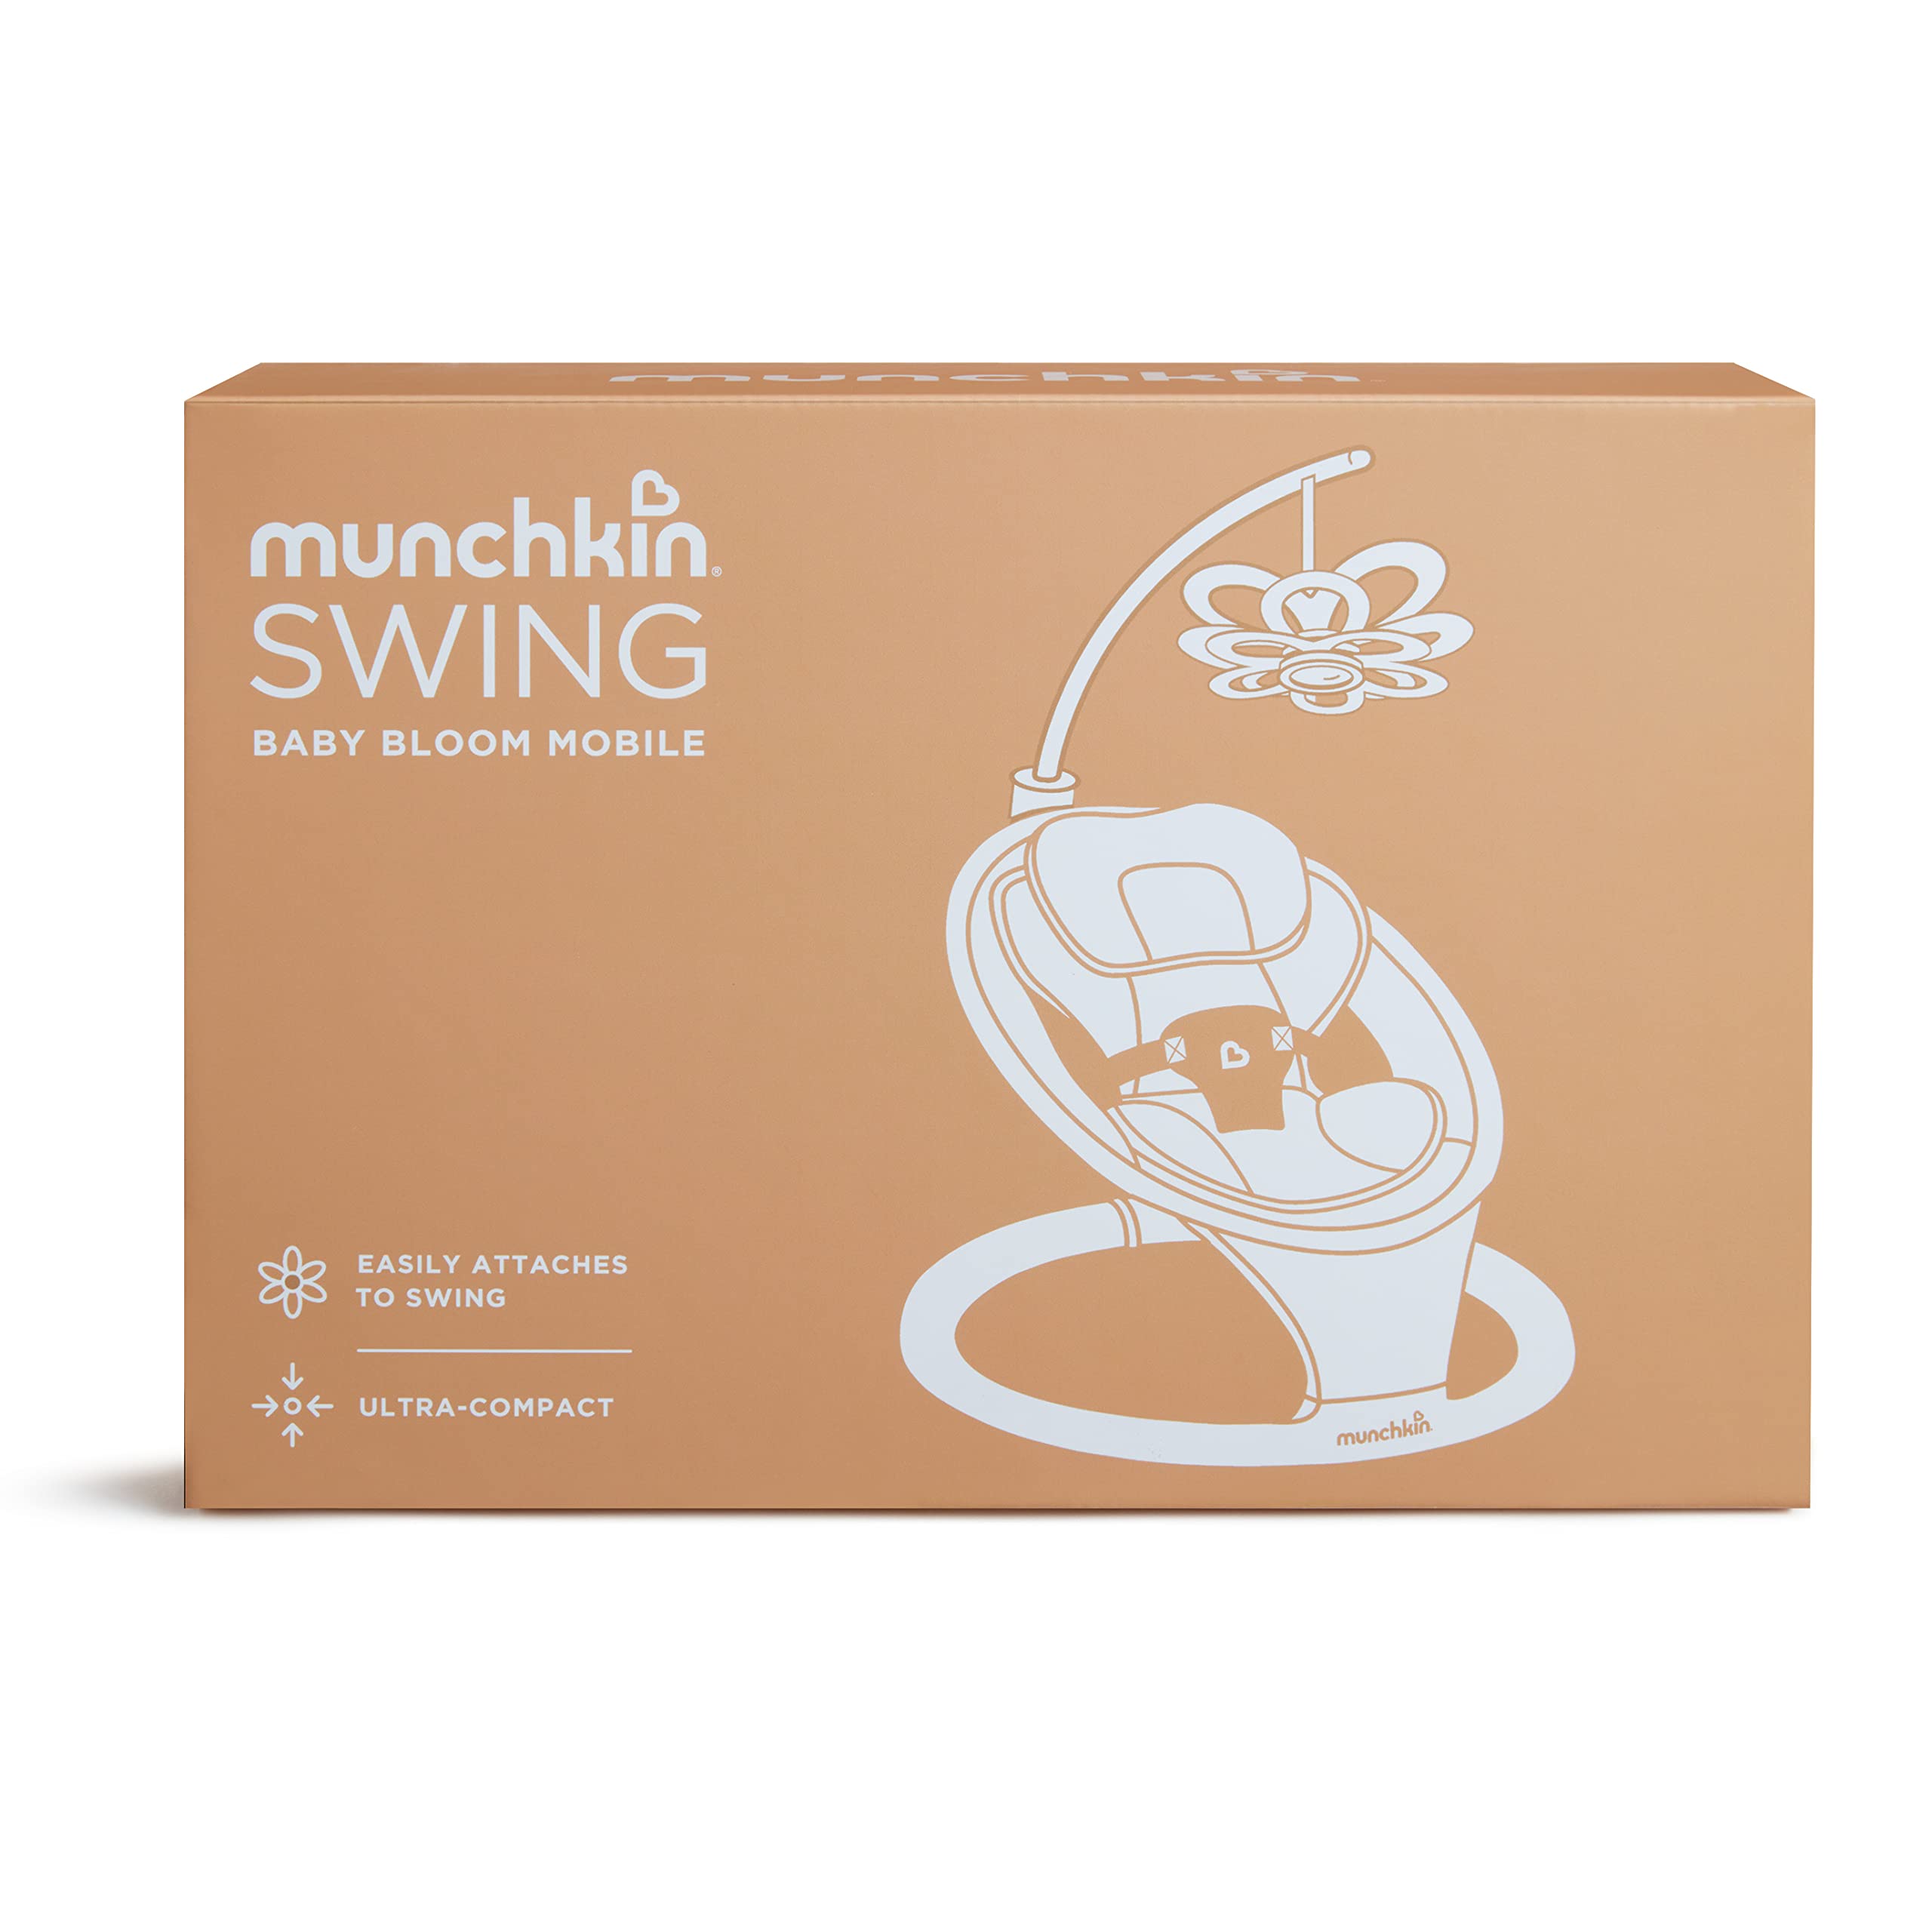 Munchkin® Baby Bloom™ Mobile for Munchkin Swing - High-Contrast Infant Mobile with Mirror